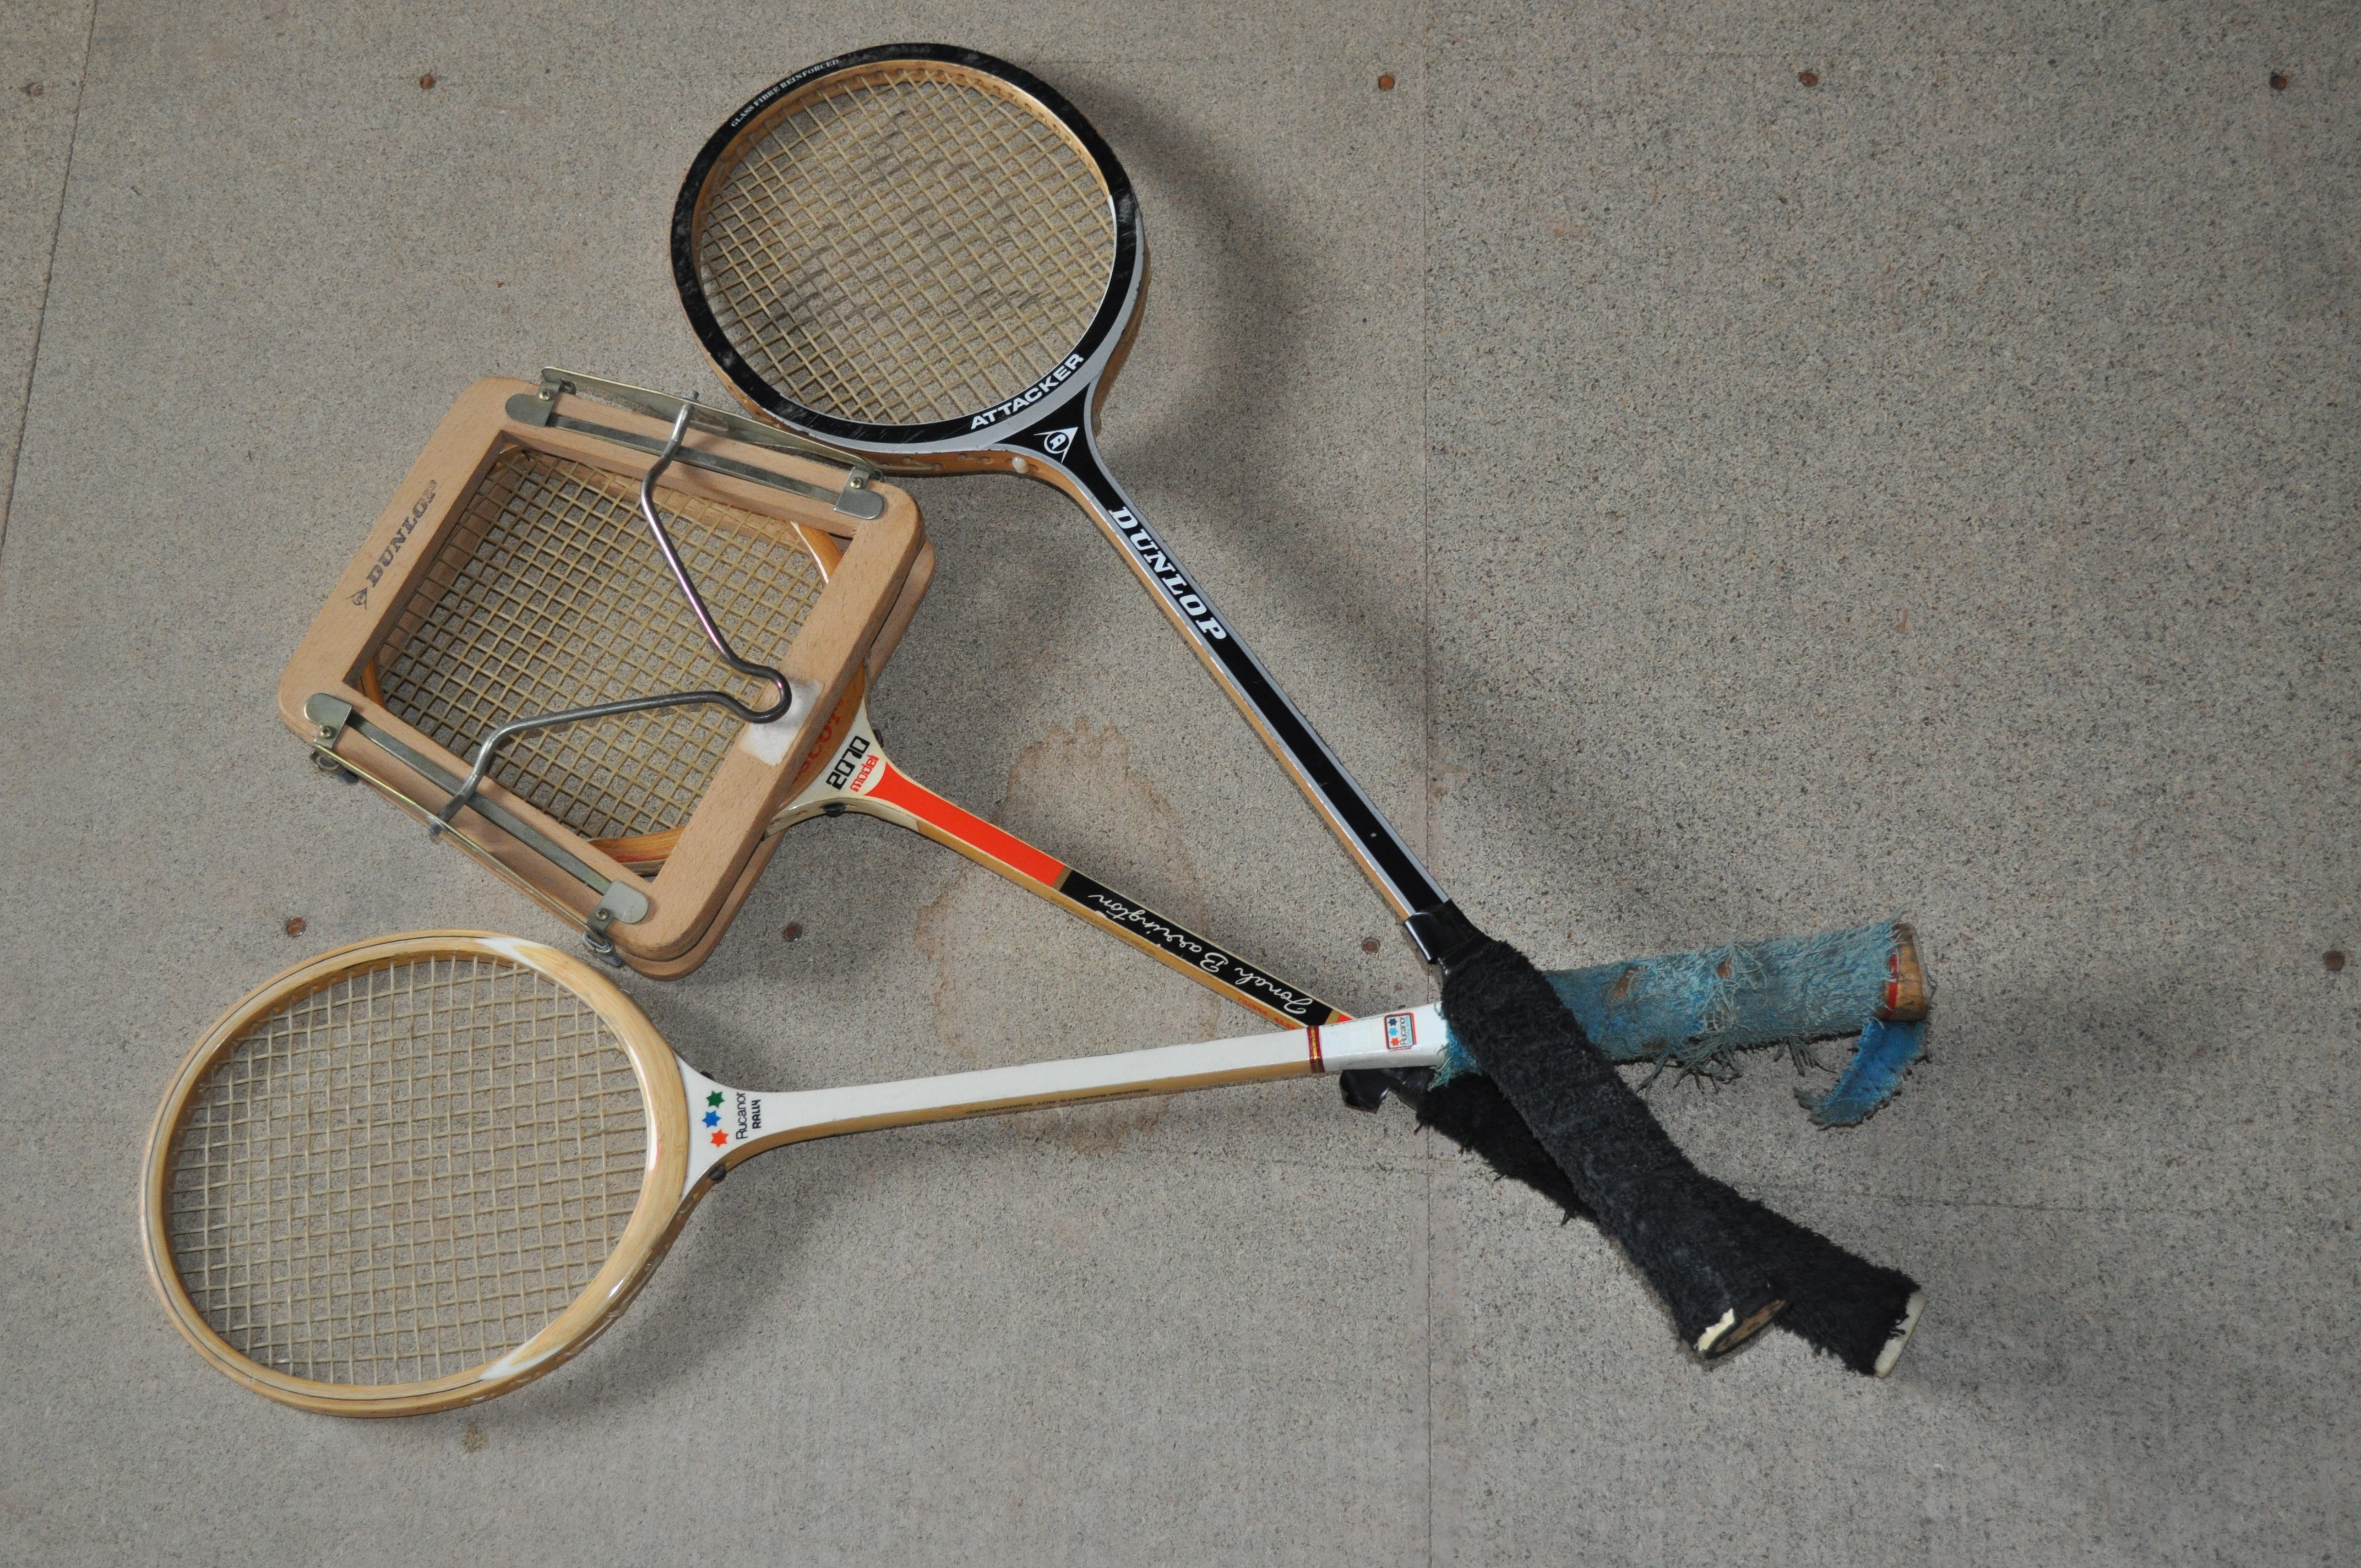 Three wooden rackets, one with racket press